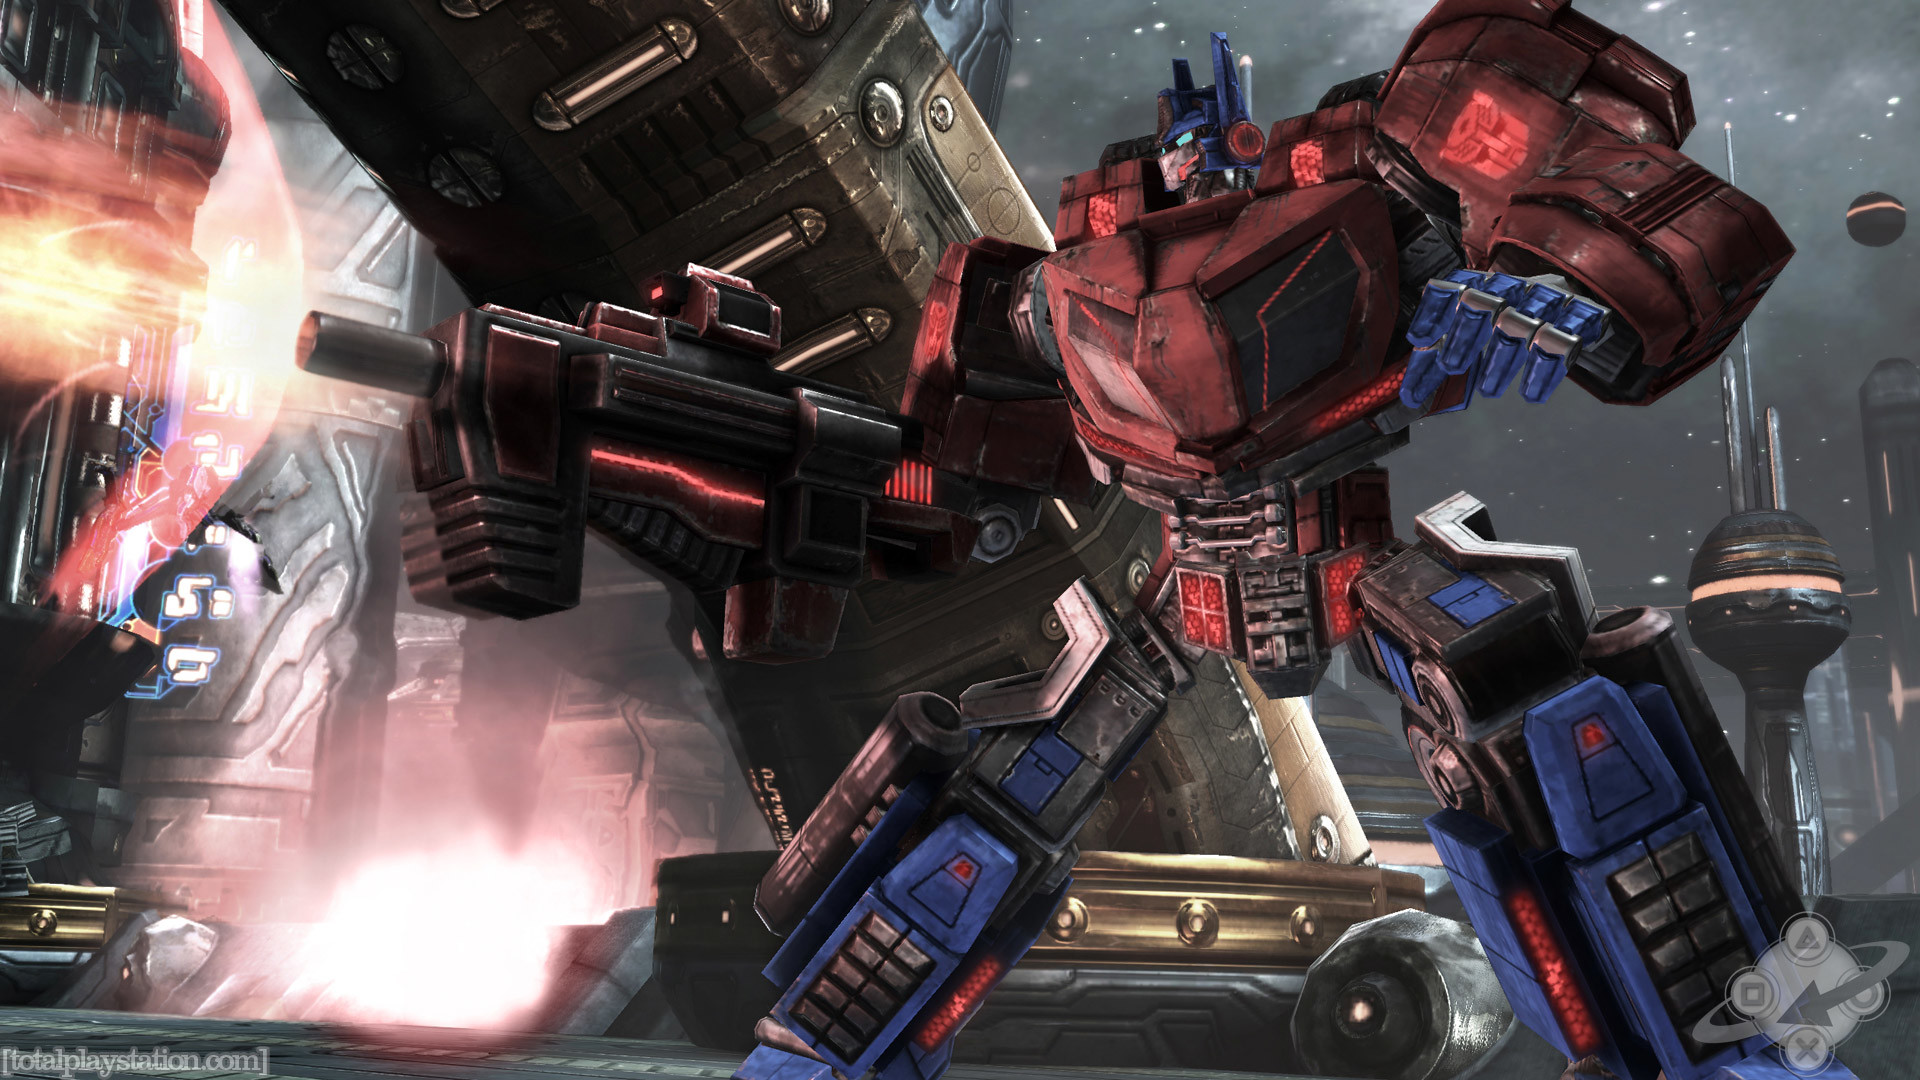 1920x1080 Wallpapers transformers_war_for_cybertron_wallpaper_by_nick004-1366x768  1679771 Transformers-War-for-Cybertron-Trailer_4 ...